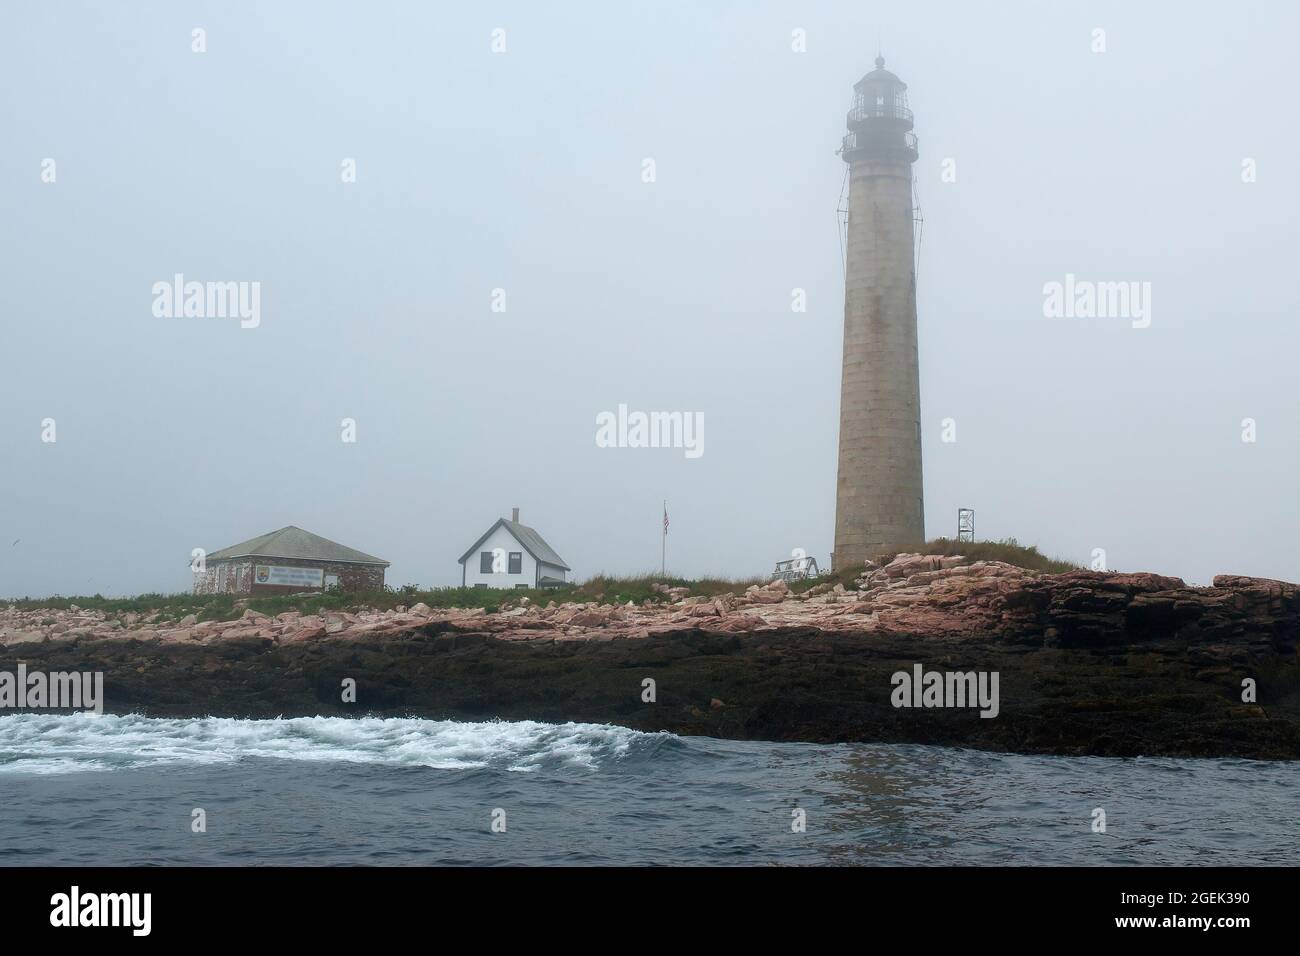 Sun starts to break through fog at Petit Manan lighthouse, a rocky island beacon that is the second tallest lighthouse in Maine. Stock Photo